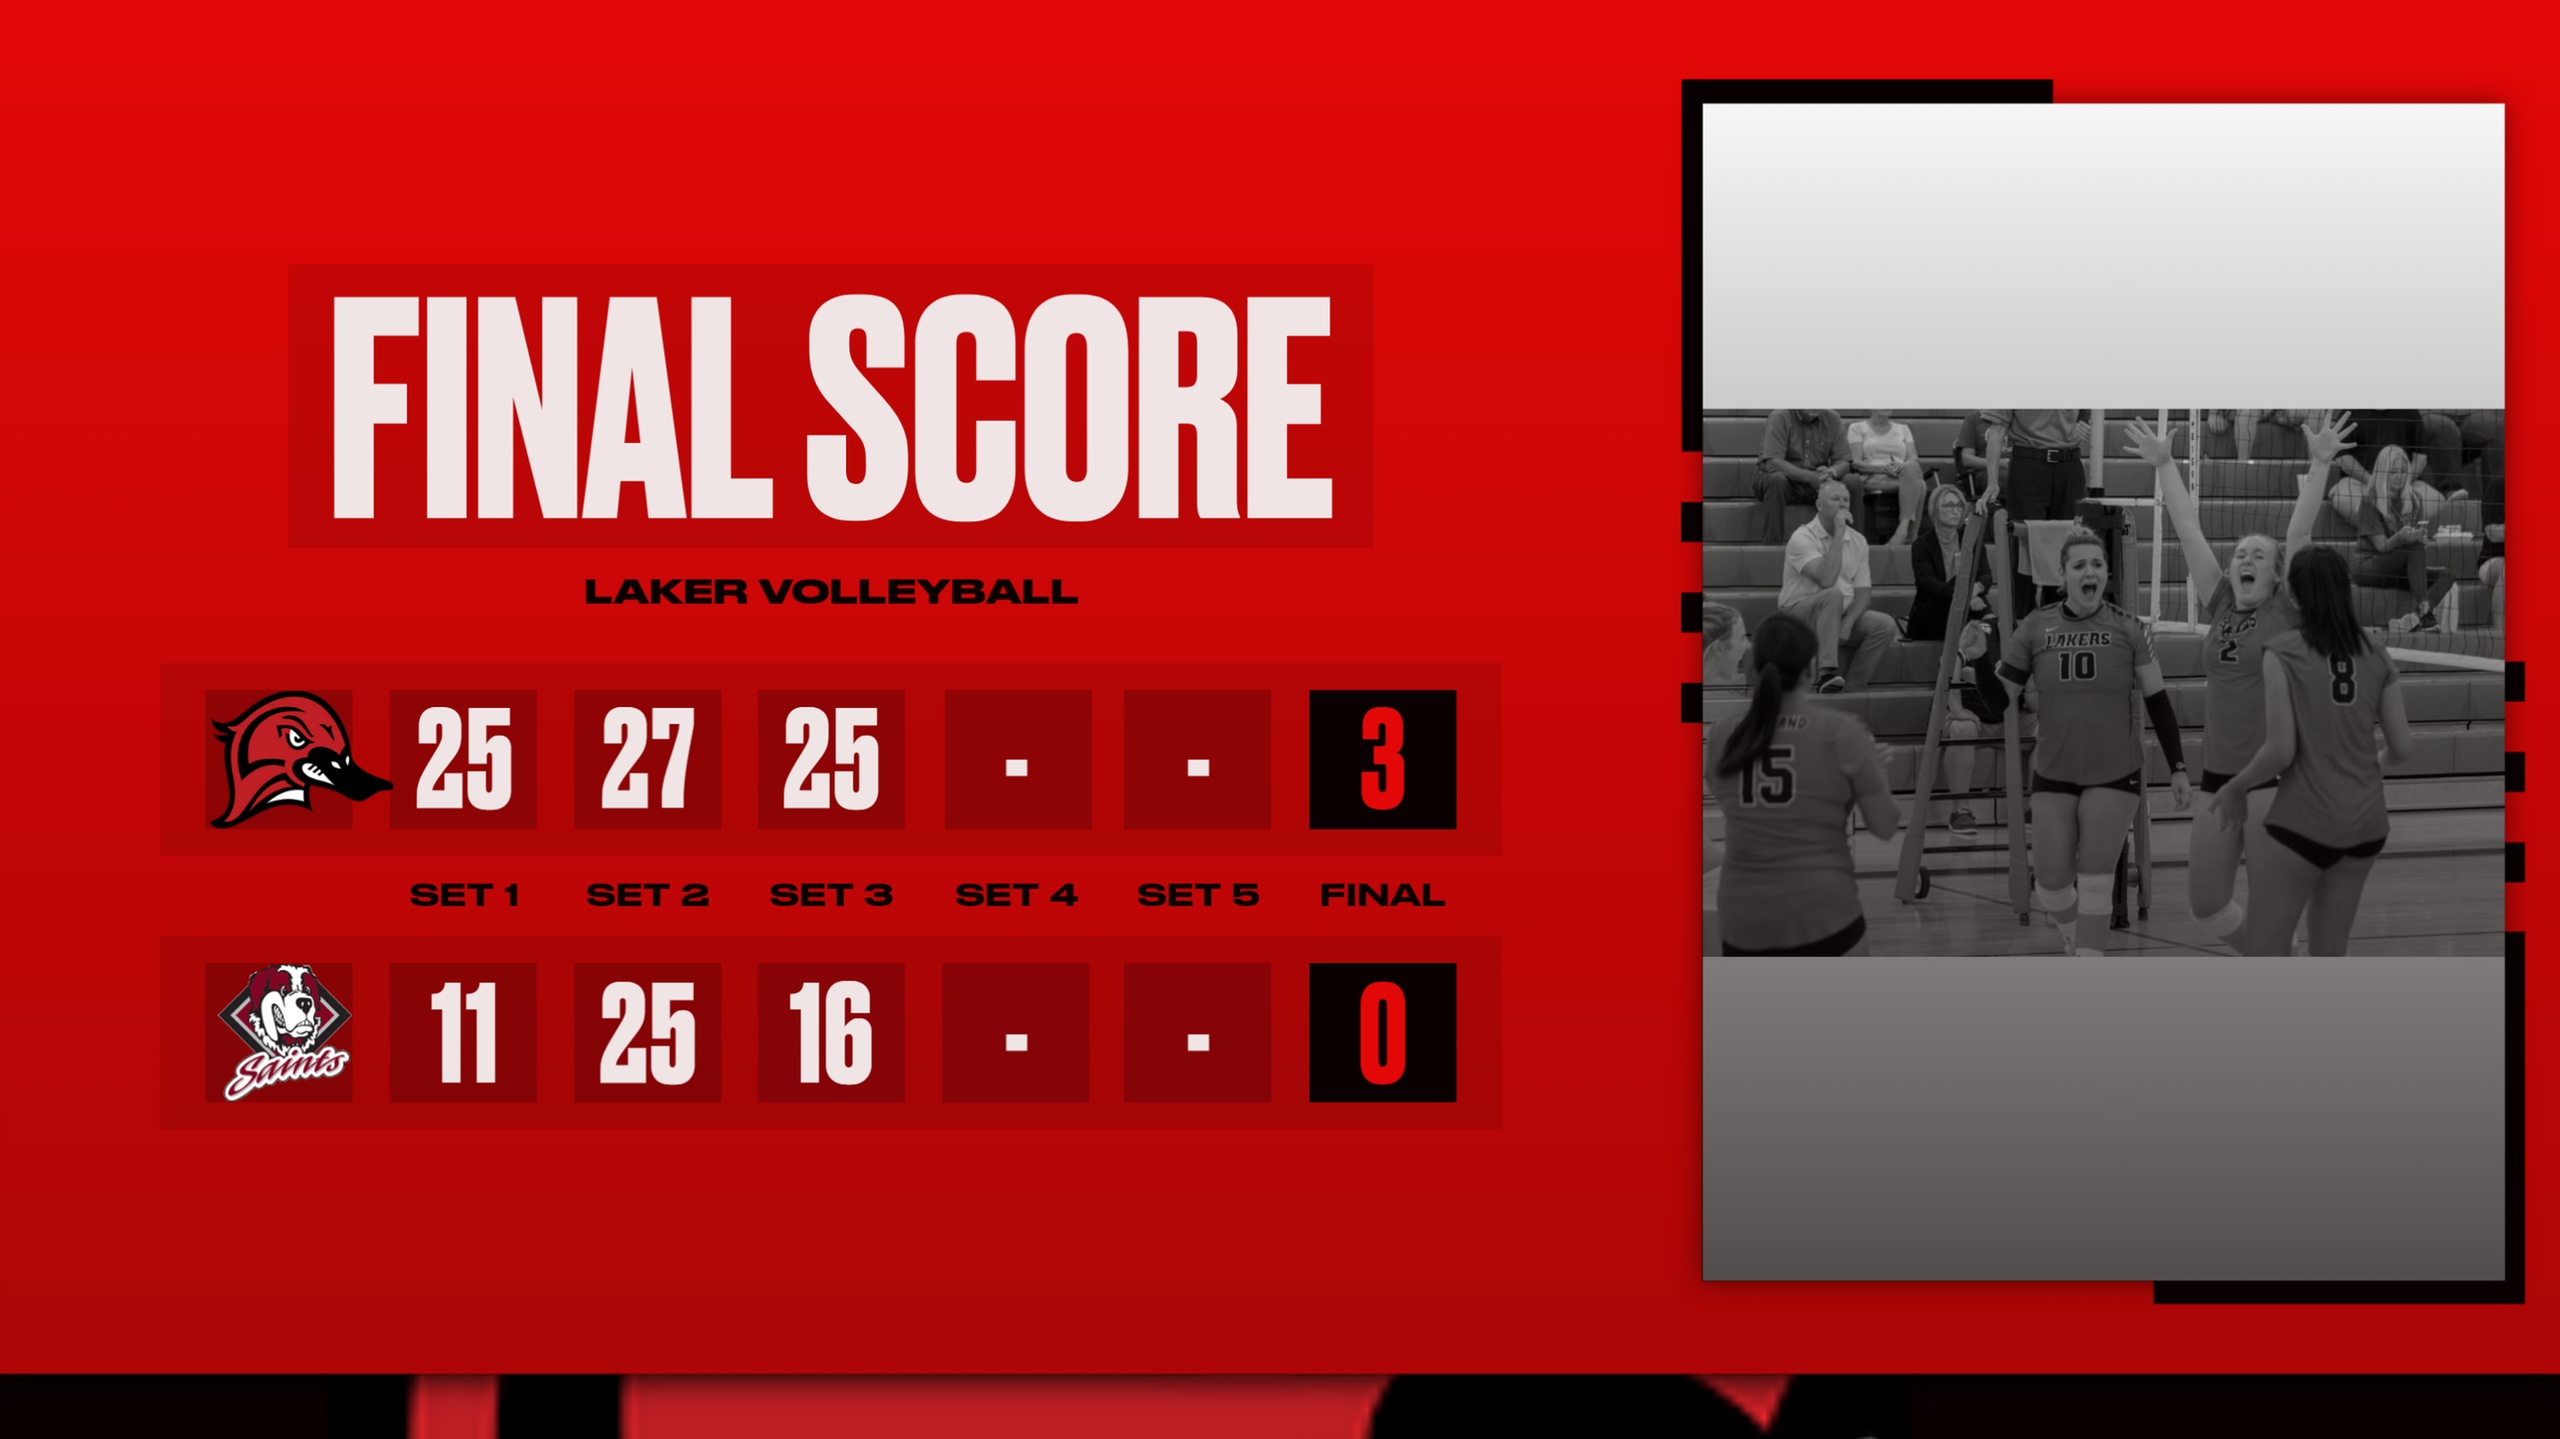 Lakers Sweep Past the Saints to win the GRAC Volleyball Match